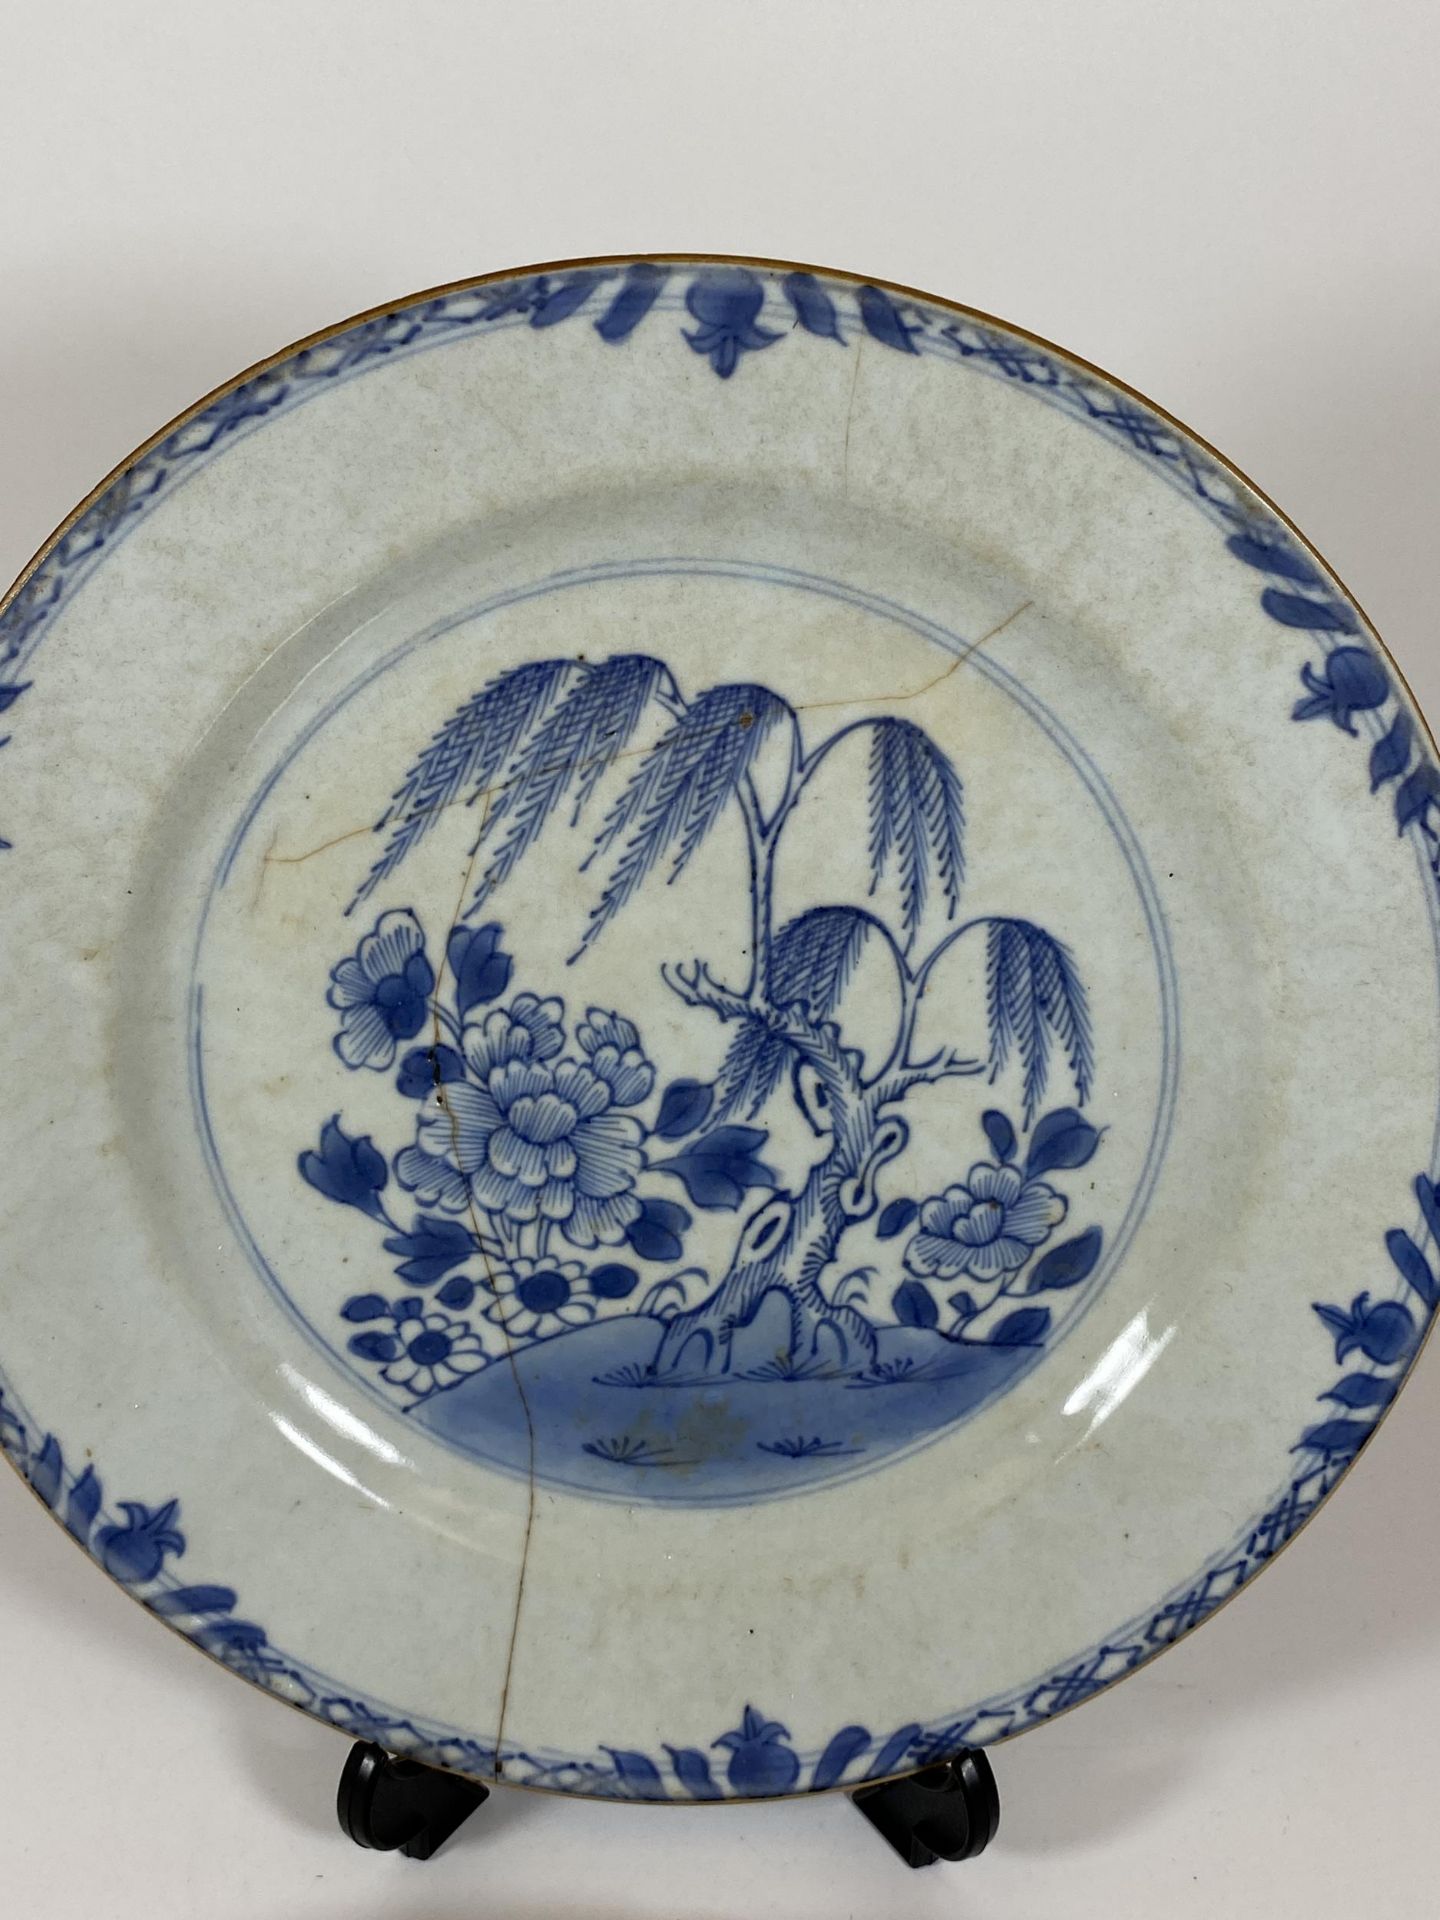 A PAIR OF 18TH CENTURY CHINESE BLUE AND WHITE FLORAL PLATES, DIAMETER 23CM - Image 2 of 5